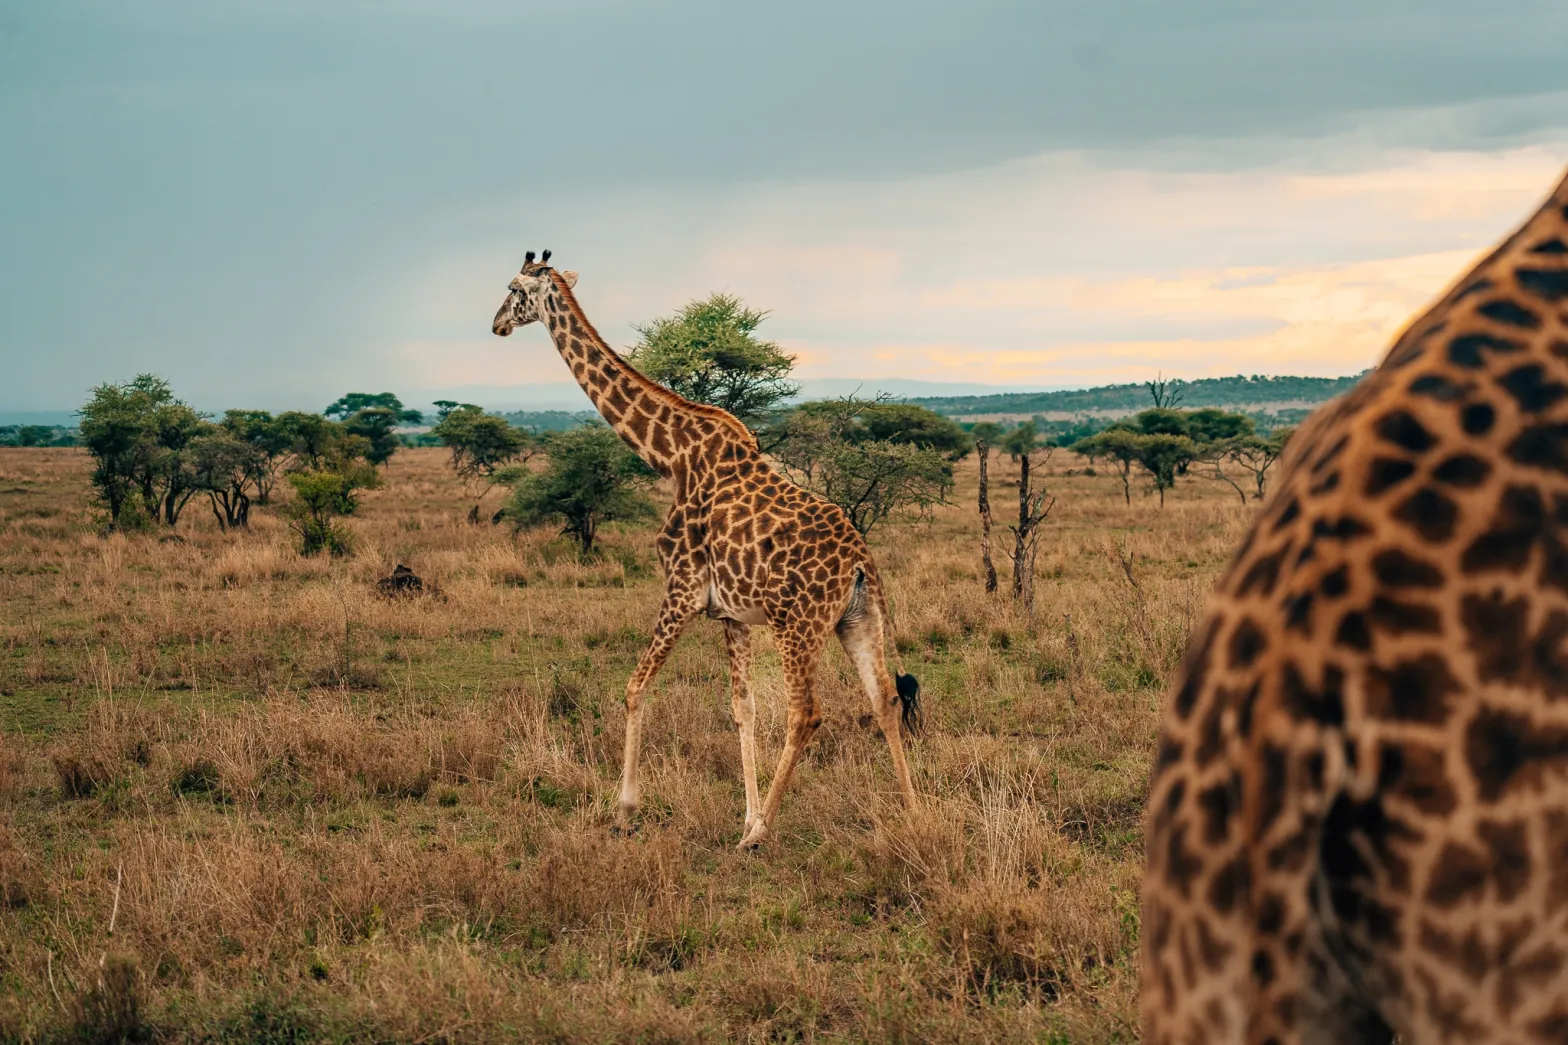 One giraffe close to the lens with another walking away in the back with the sunset sky in the Serengeti